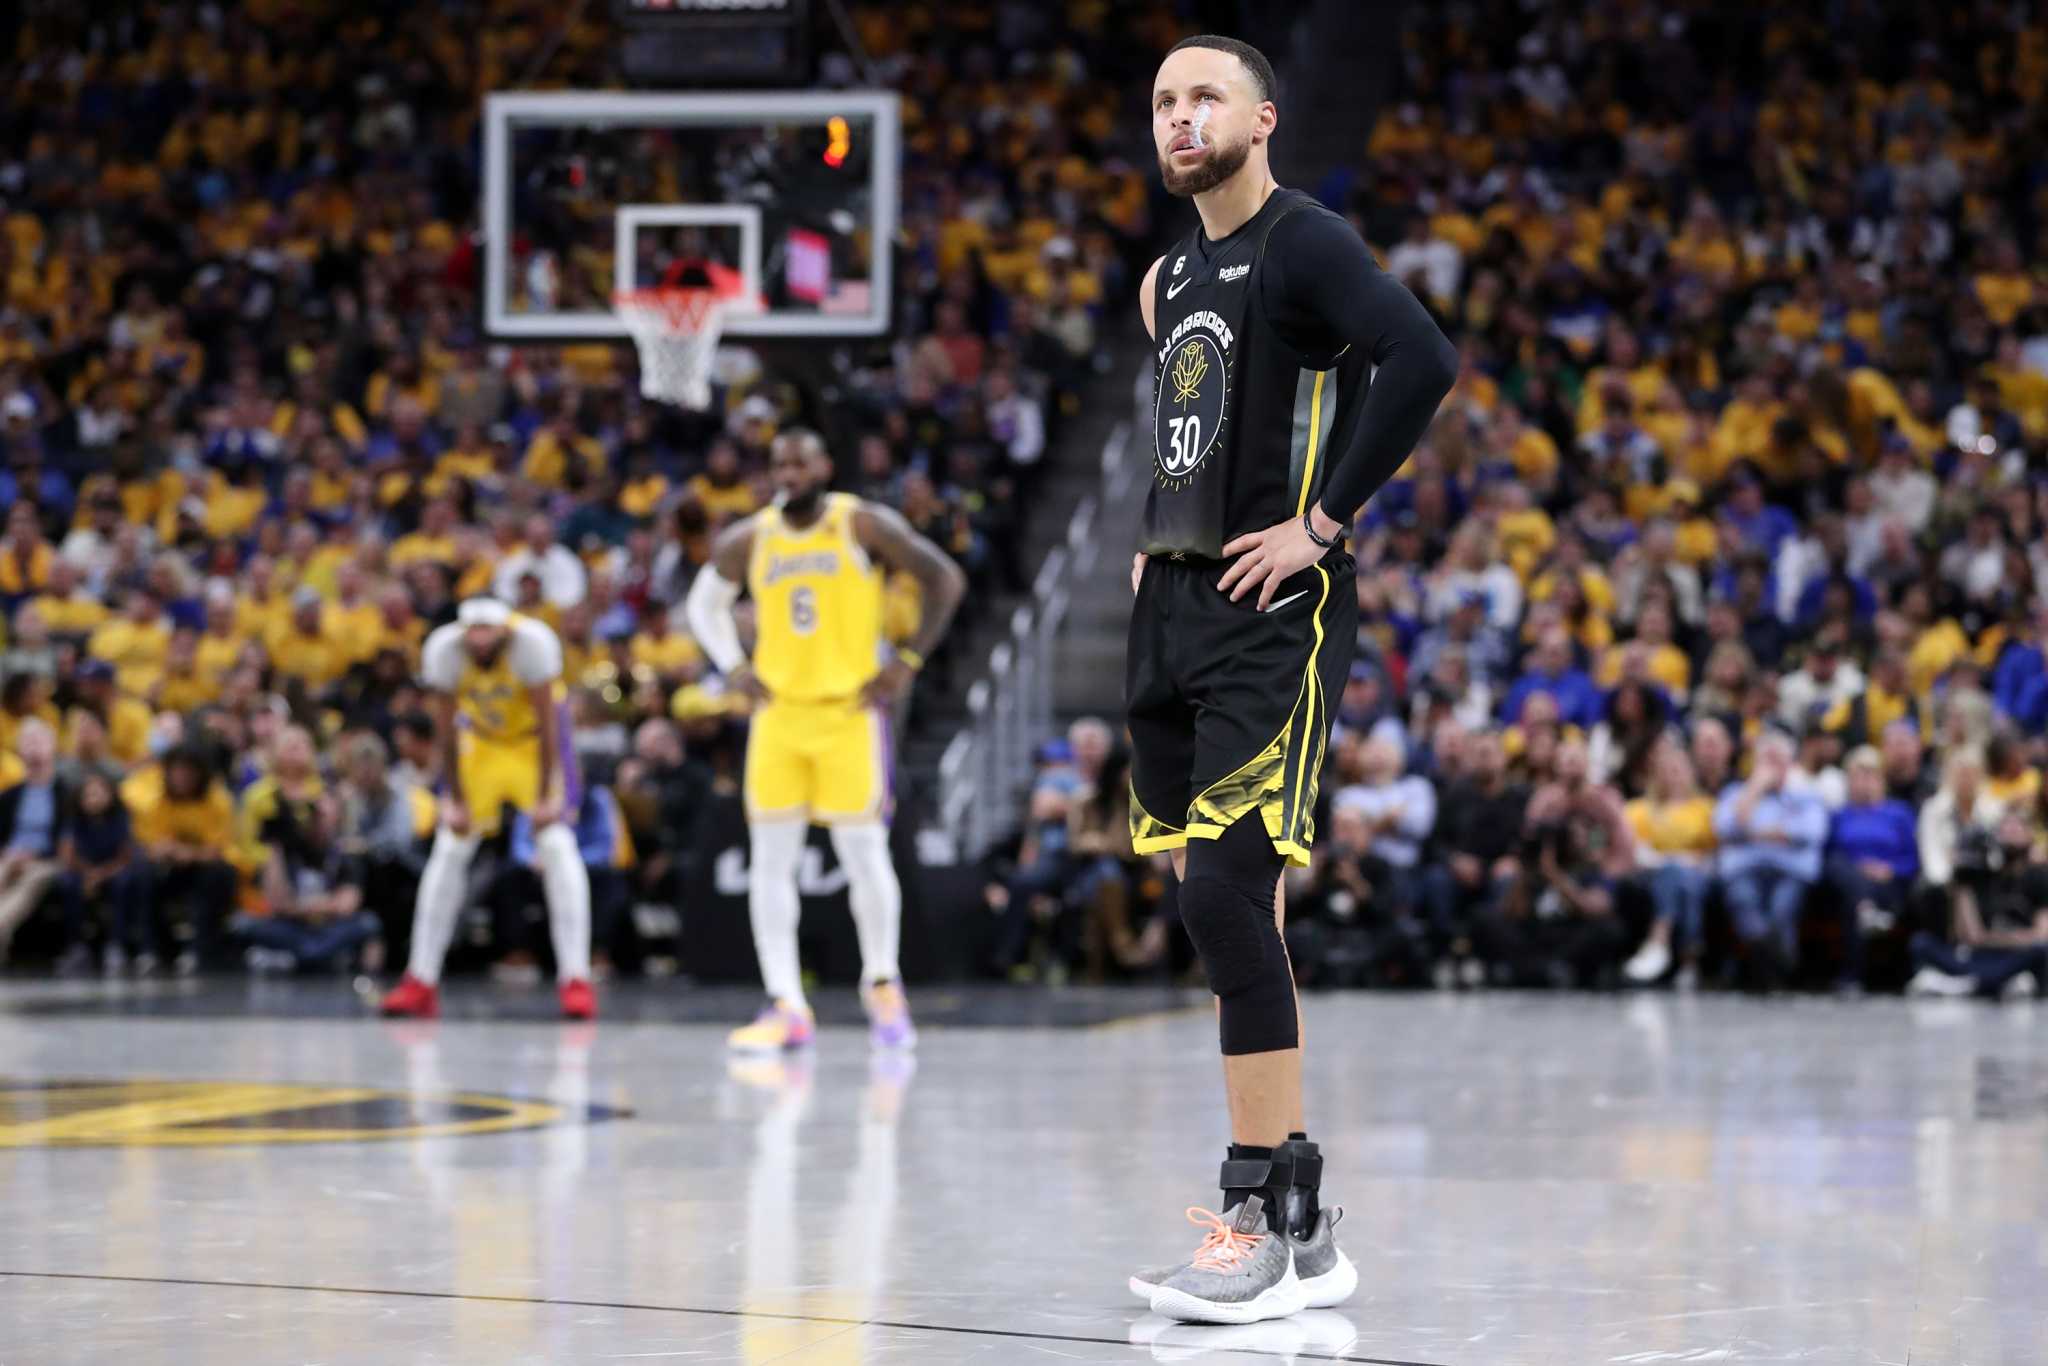 NBA playoffs: Warriors show different identity in Game 2 loss vs